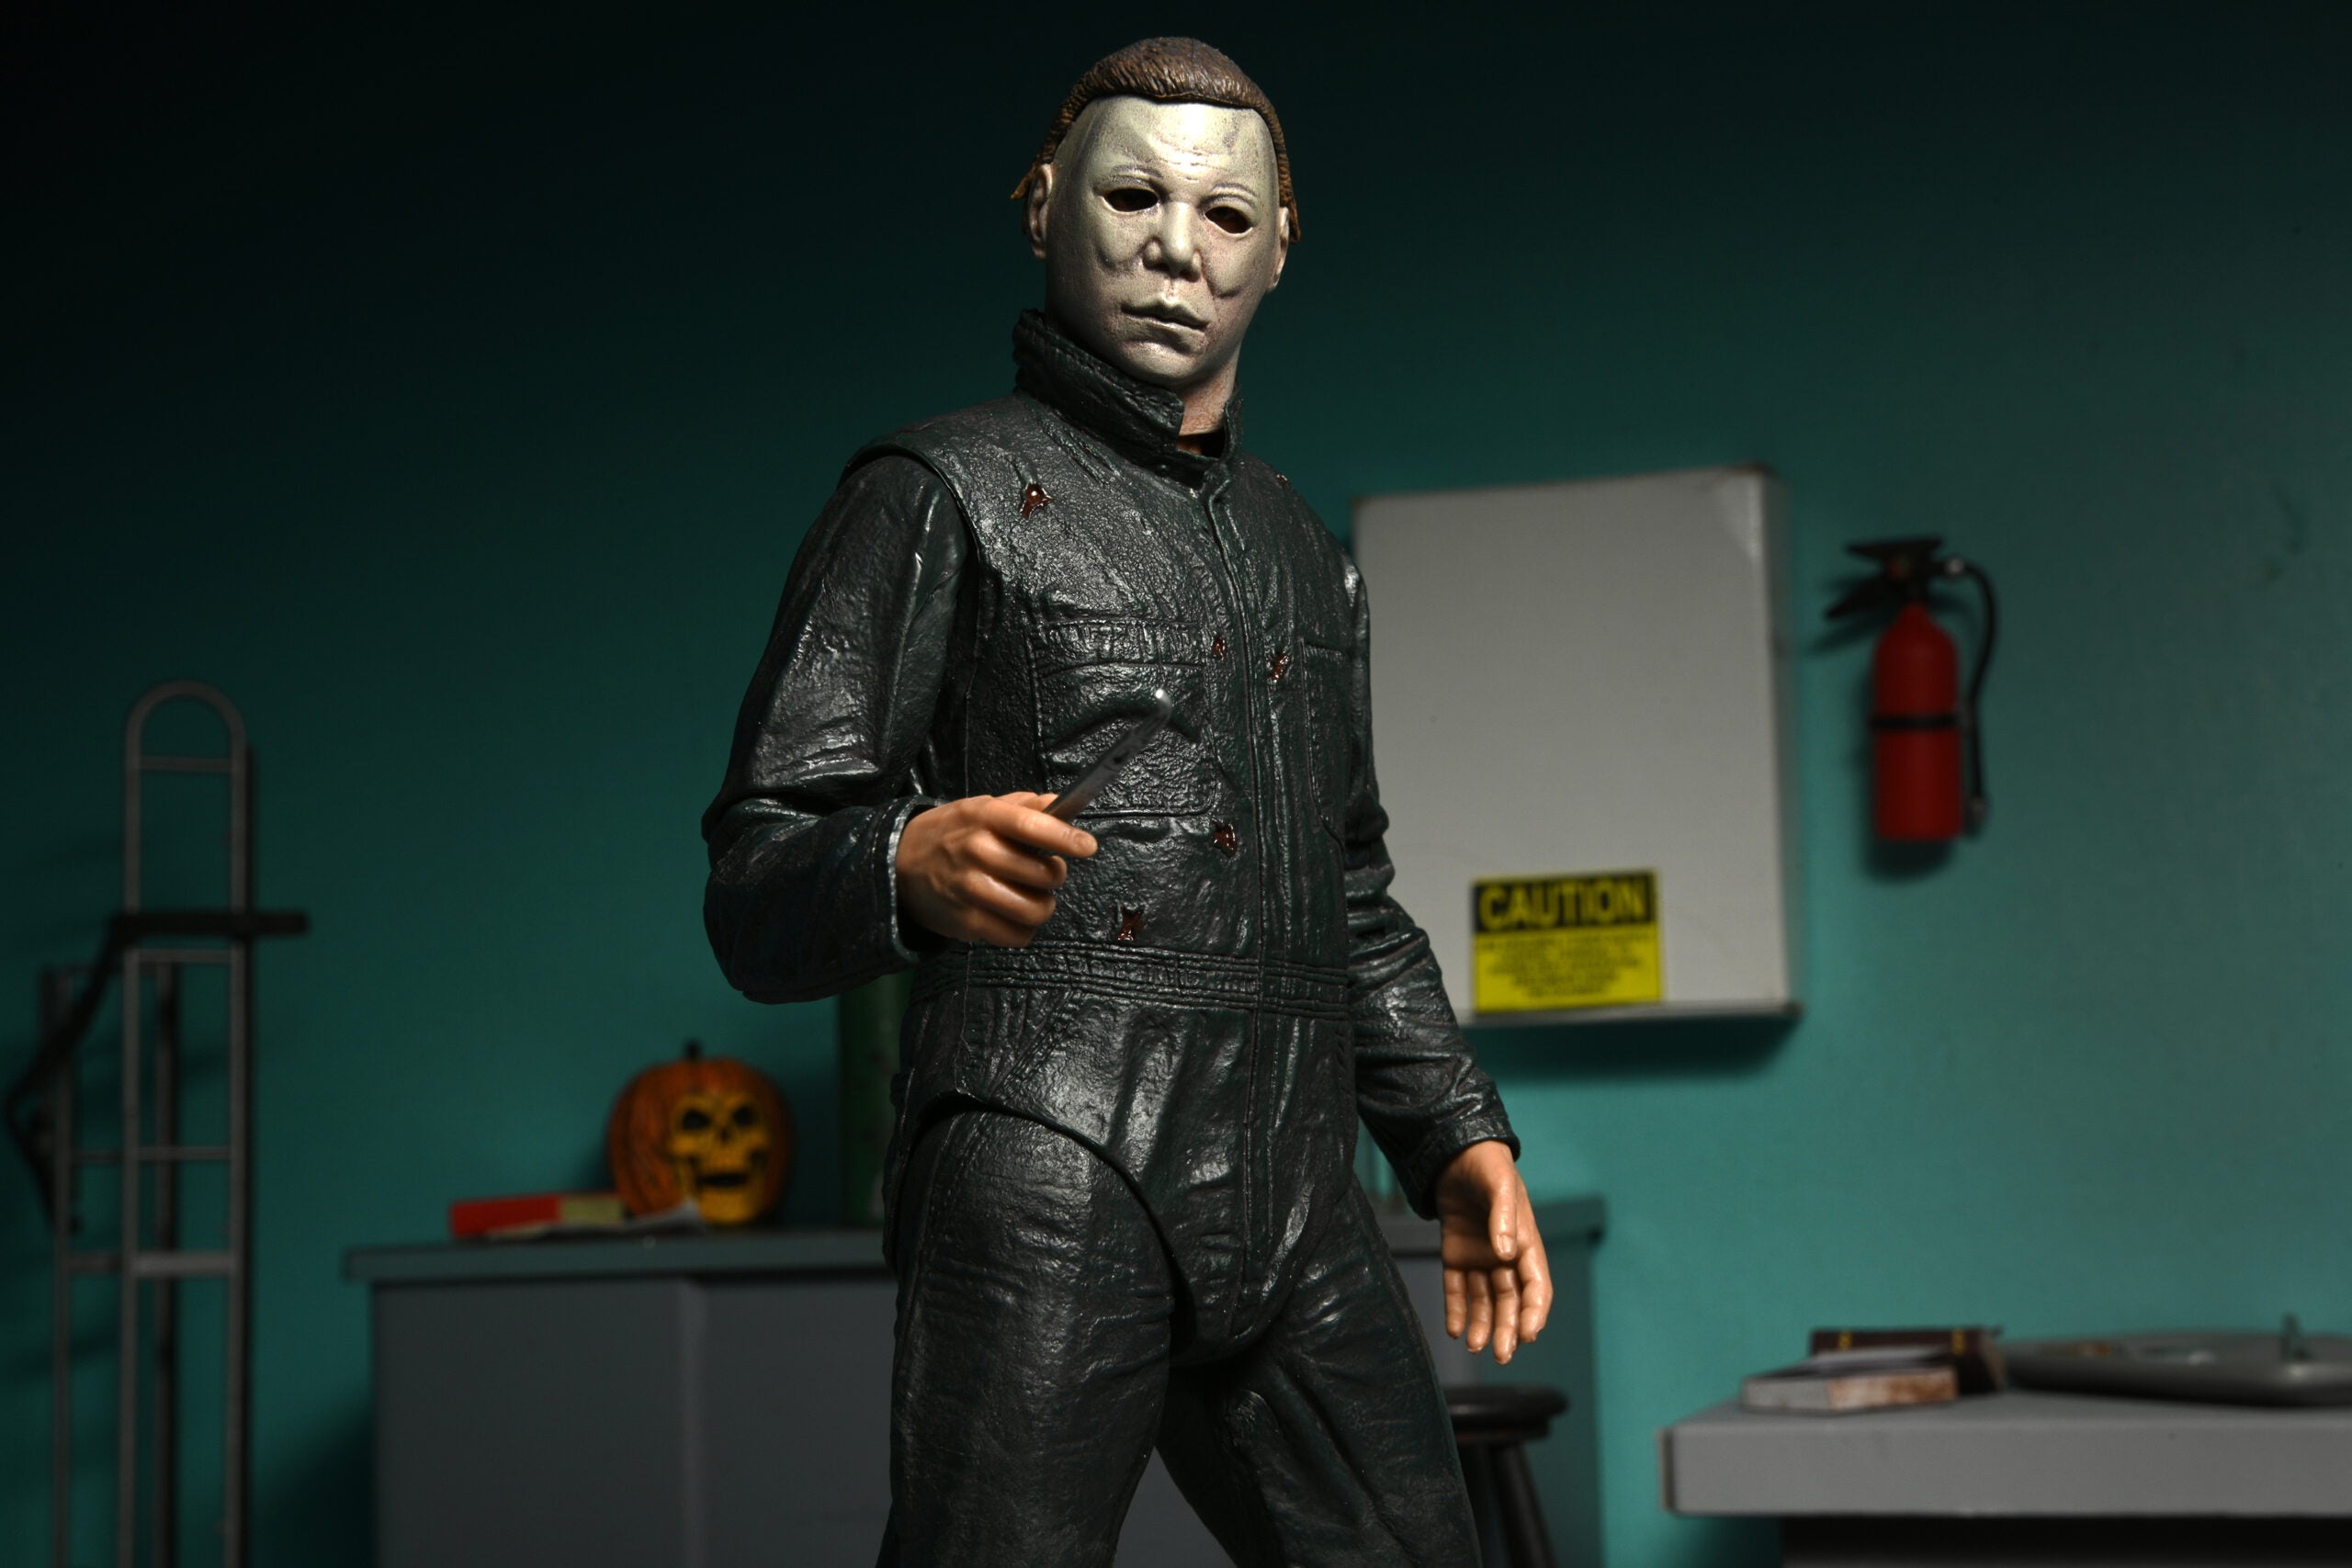 This is a NECA Halloween 2 Michael Myers and Loomis action figure set and Michael has a white mask, brown hair, green coveralls and is holding a silver scalpel and there is an orange pumpkin.